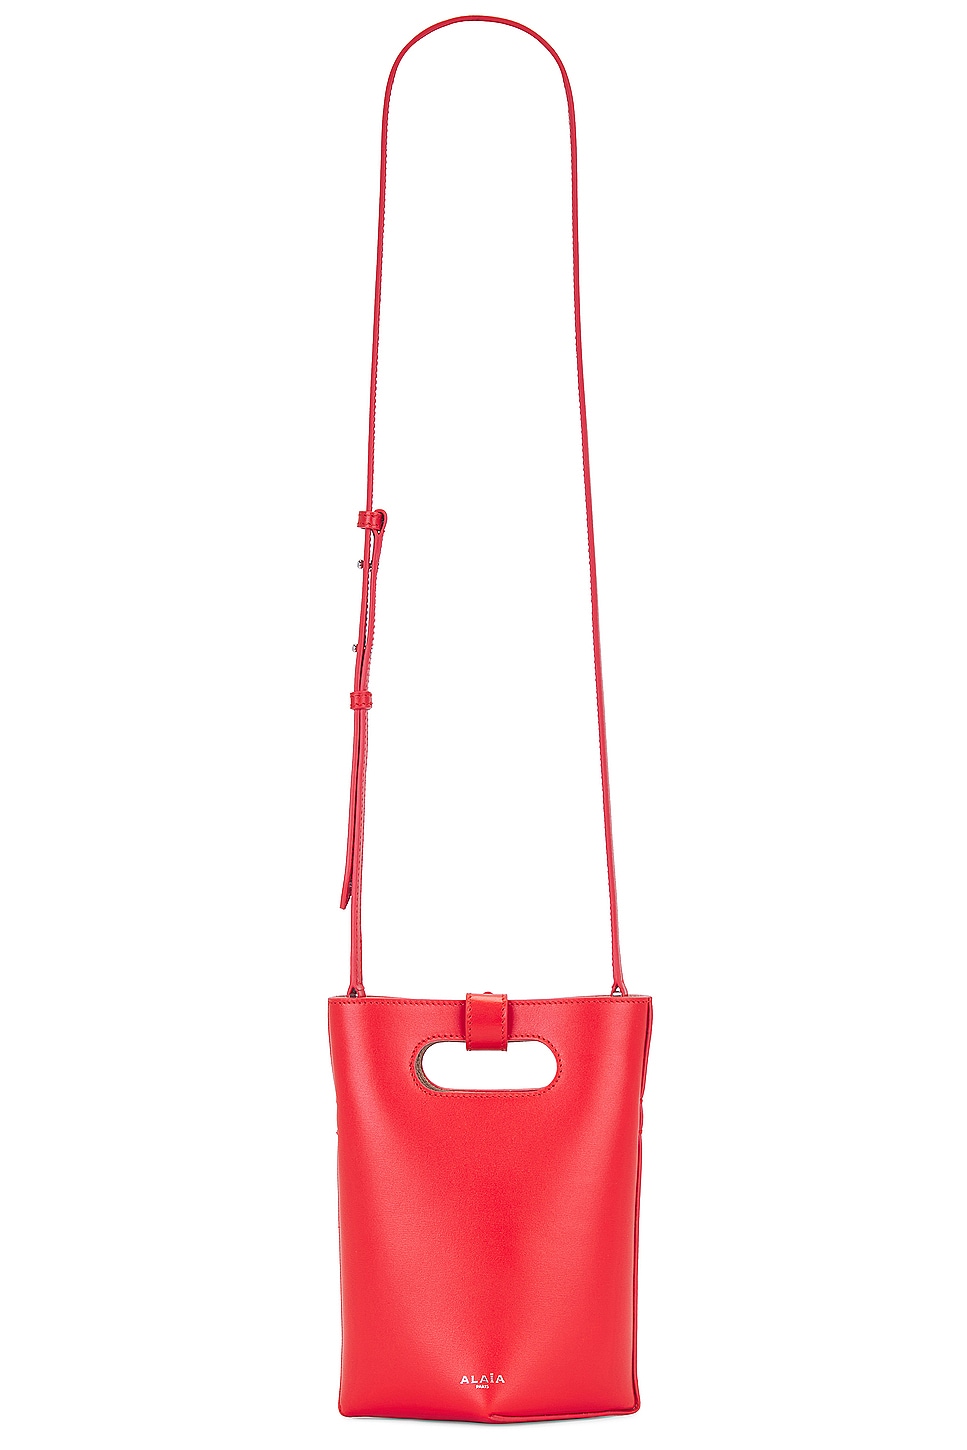 ALAÏA Folded Small Tote Bag in Red